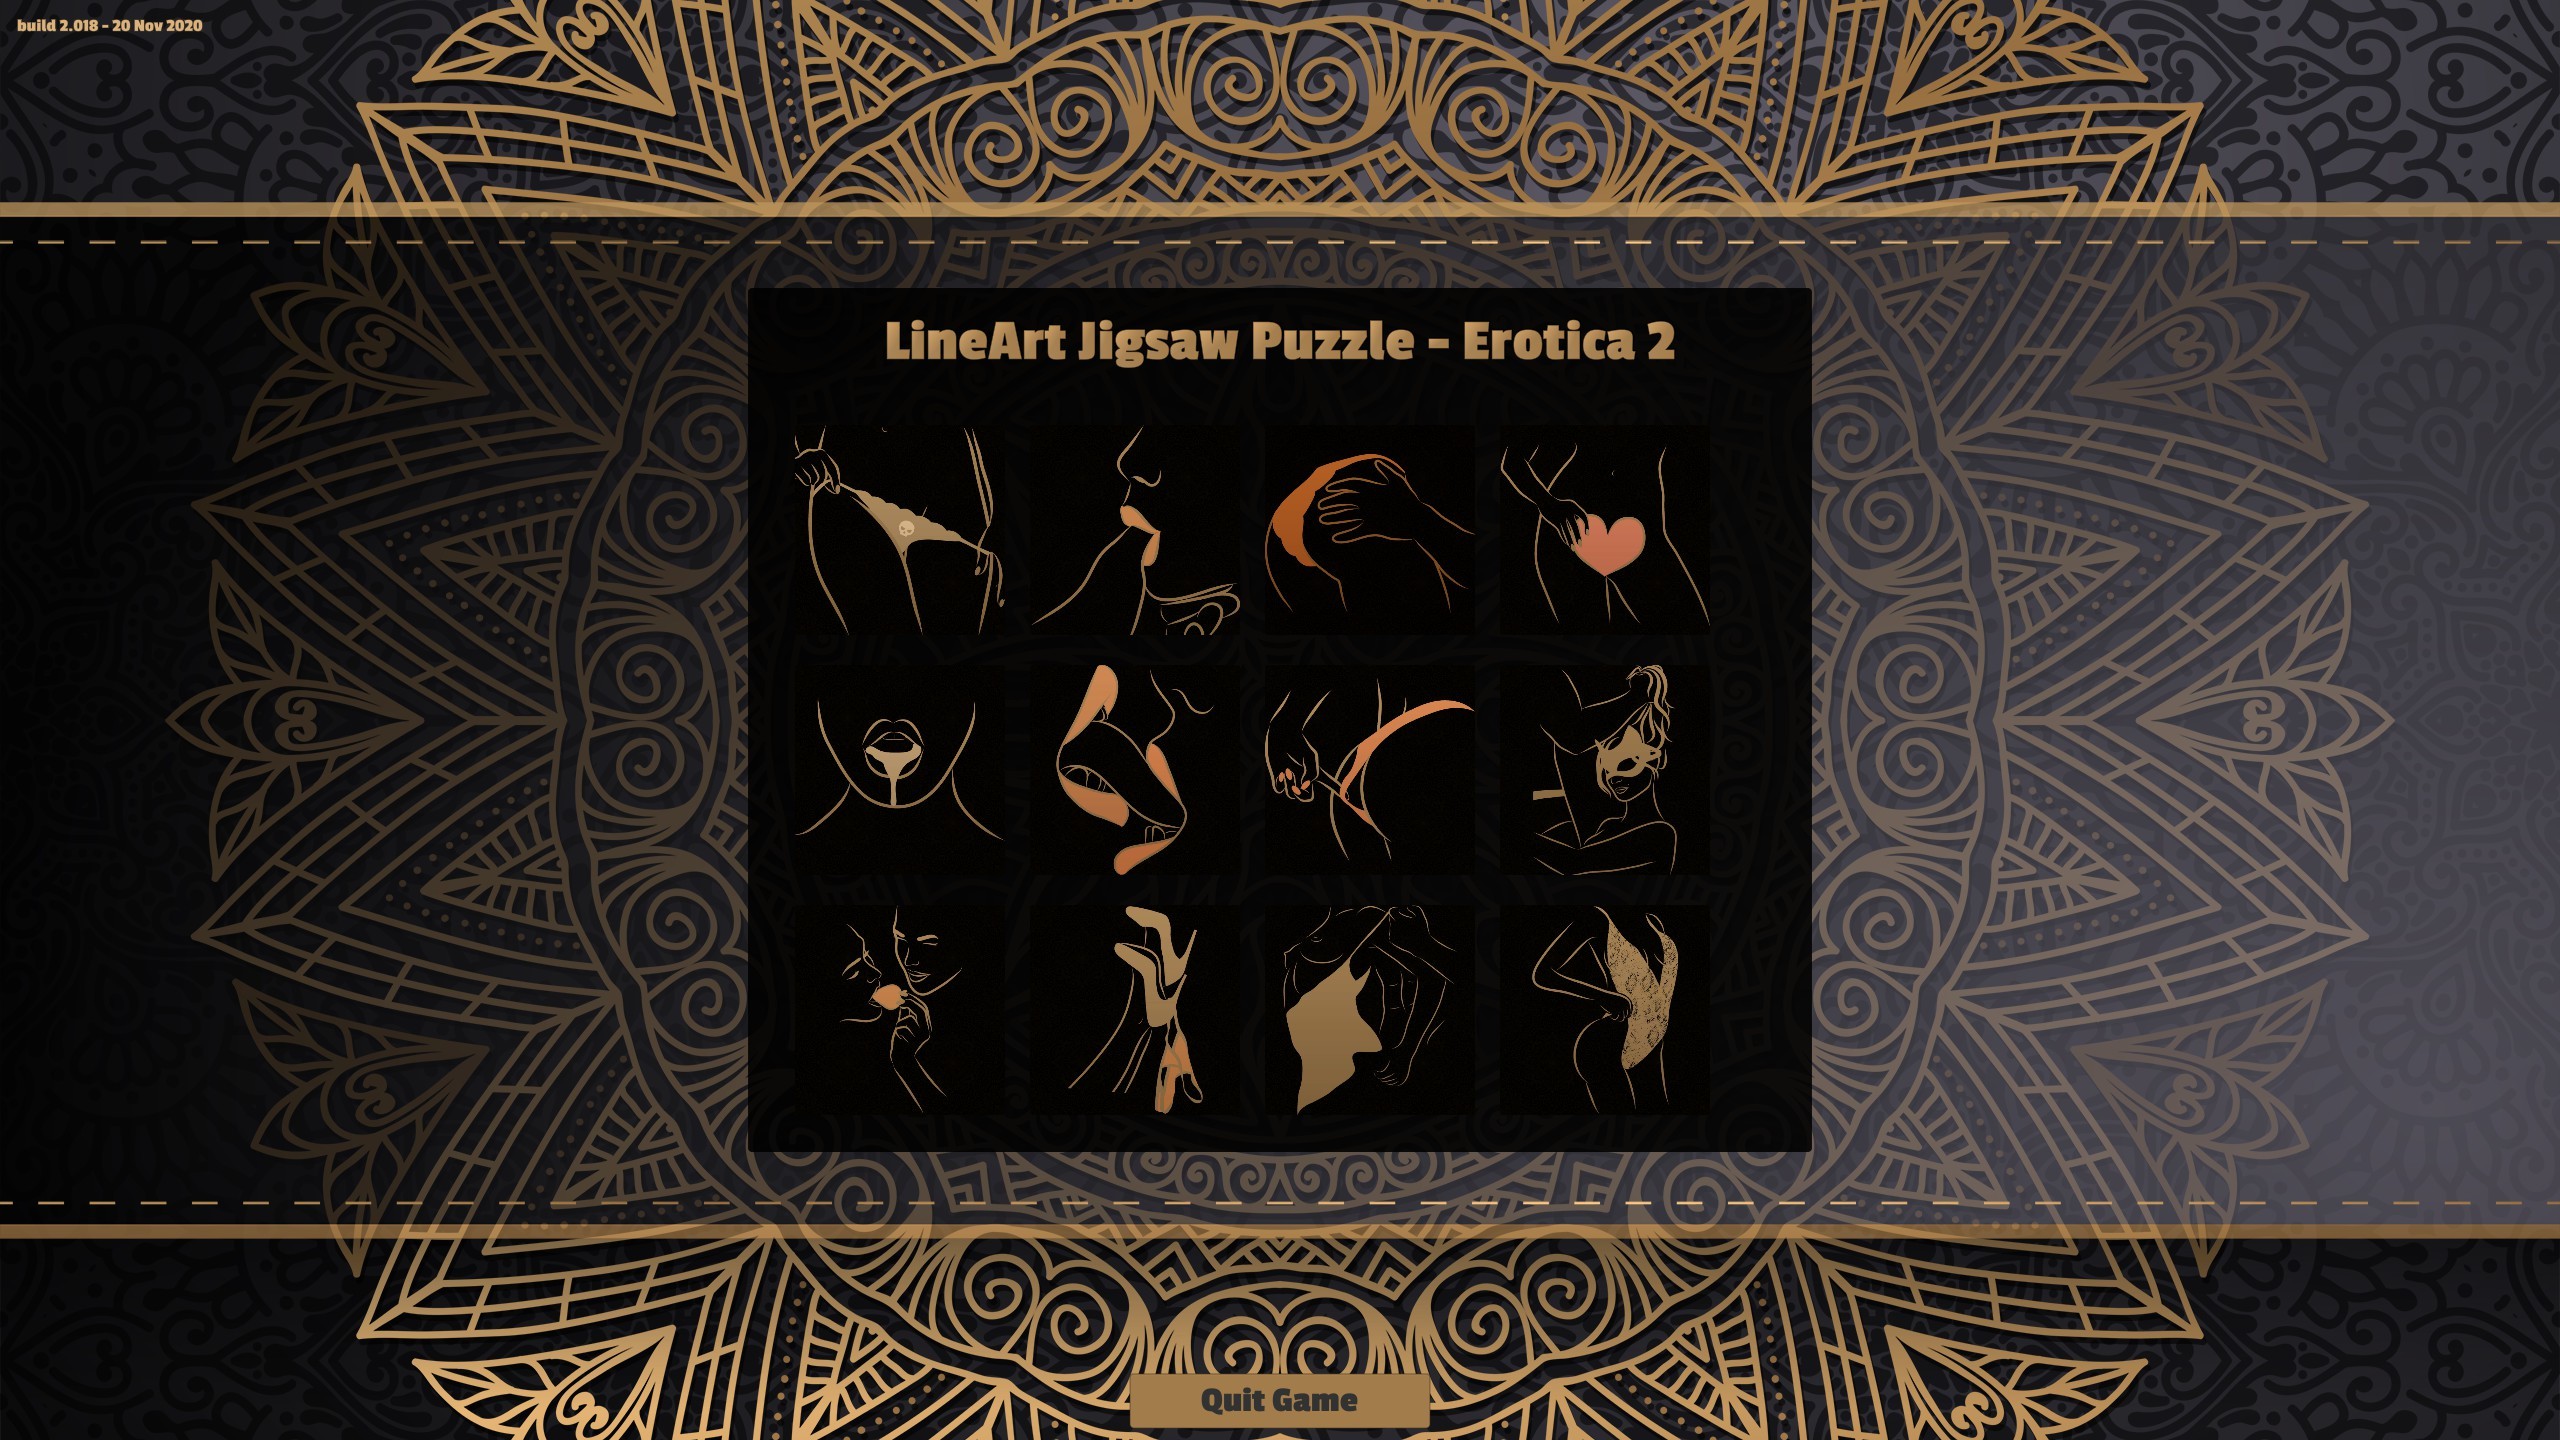 LineArt Jigsaw Puzzle - Erotica 2 Steam CD Key, $0.21